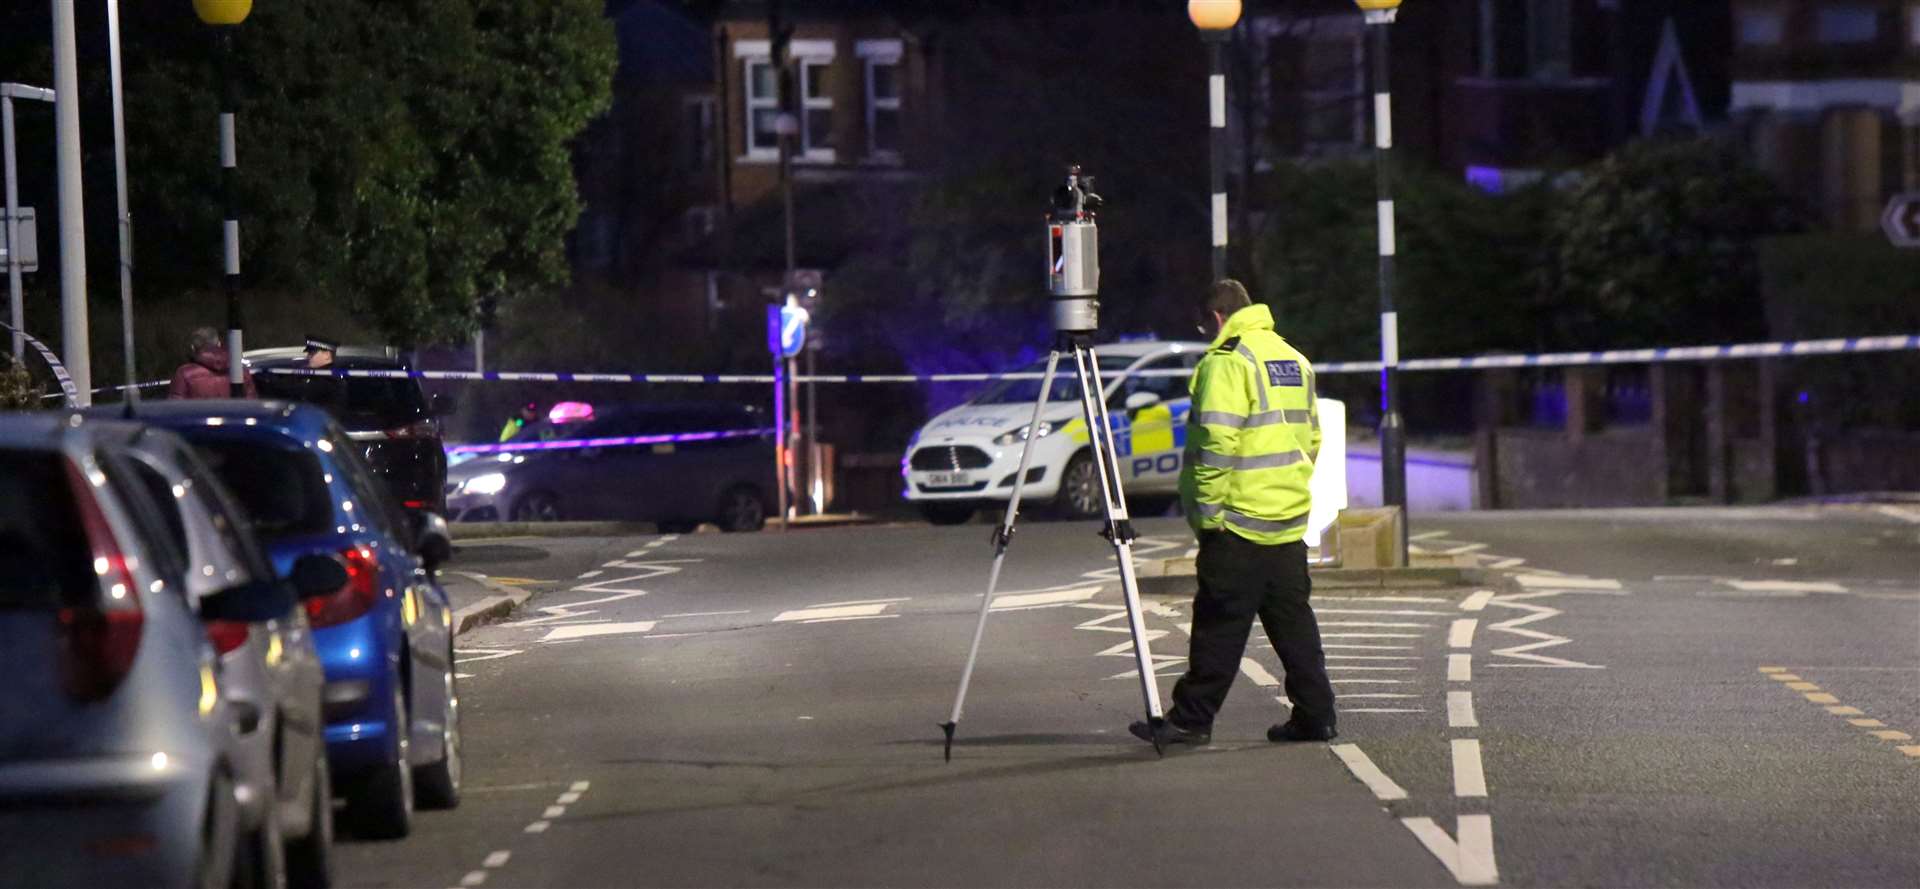 Kent Police's serious crash investigation unit yesterday carried out analysis of the scene